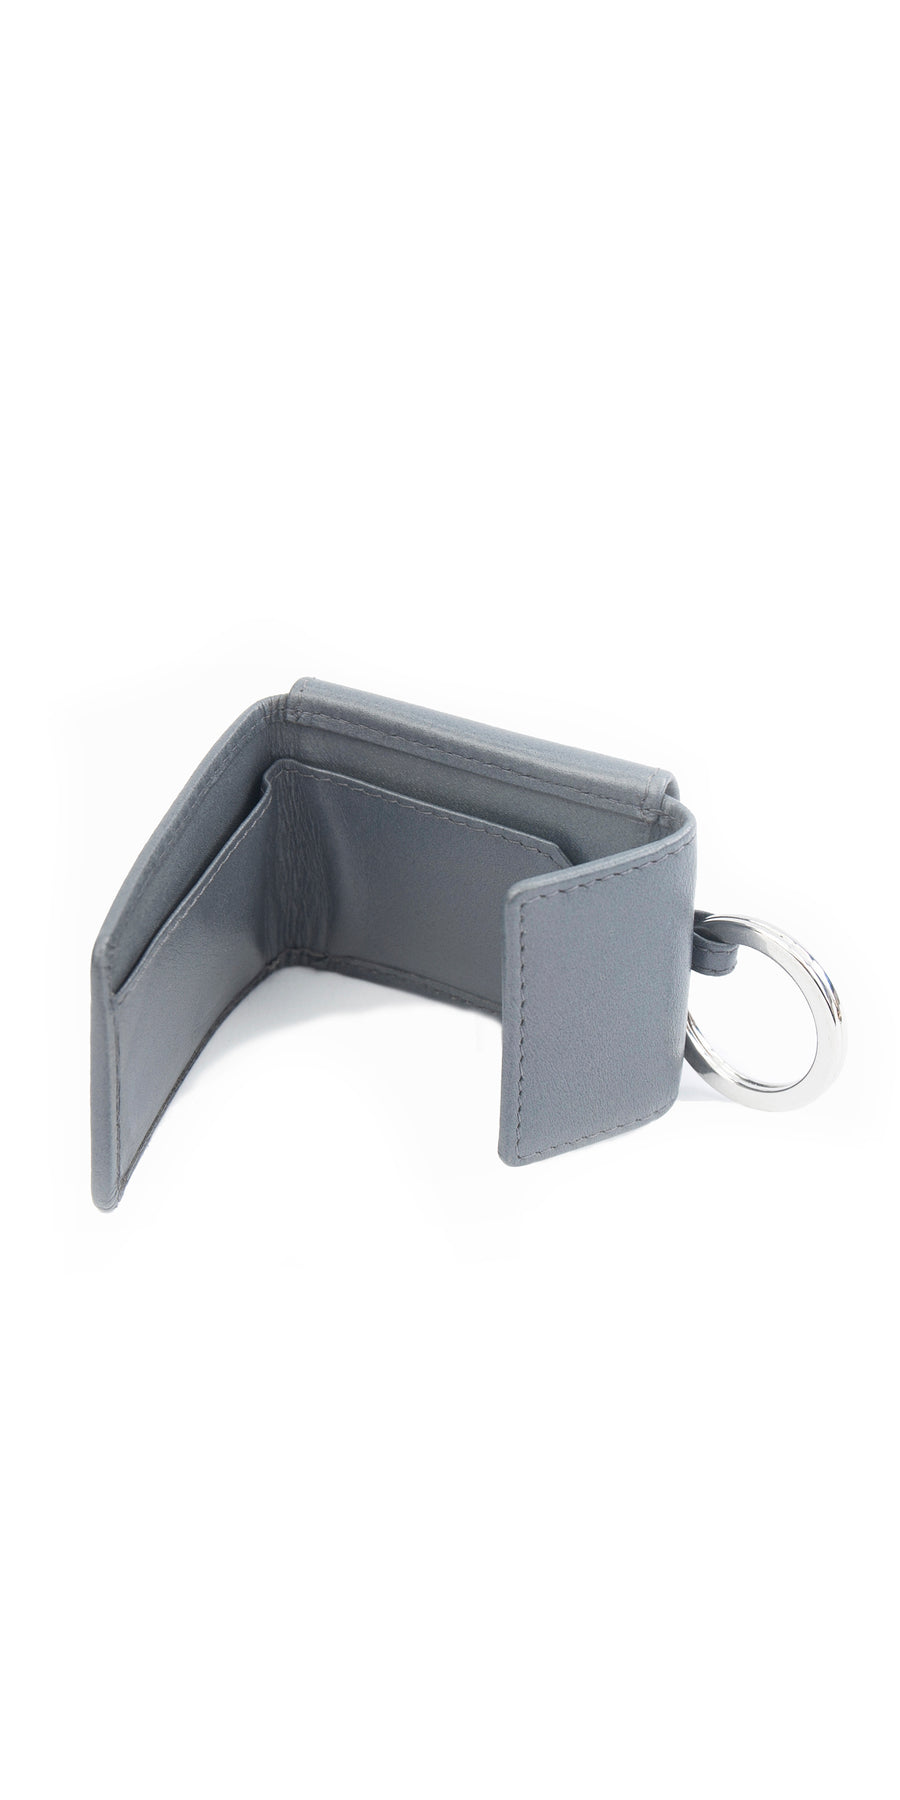 Moraltive Keyring with Purse - Grey